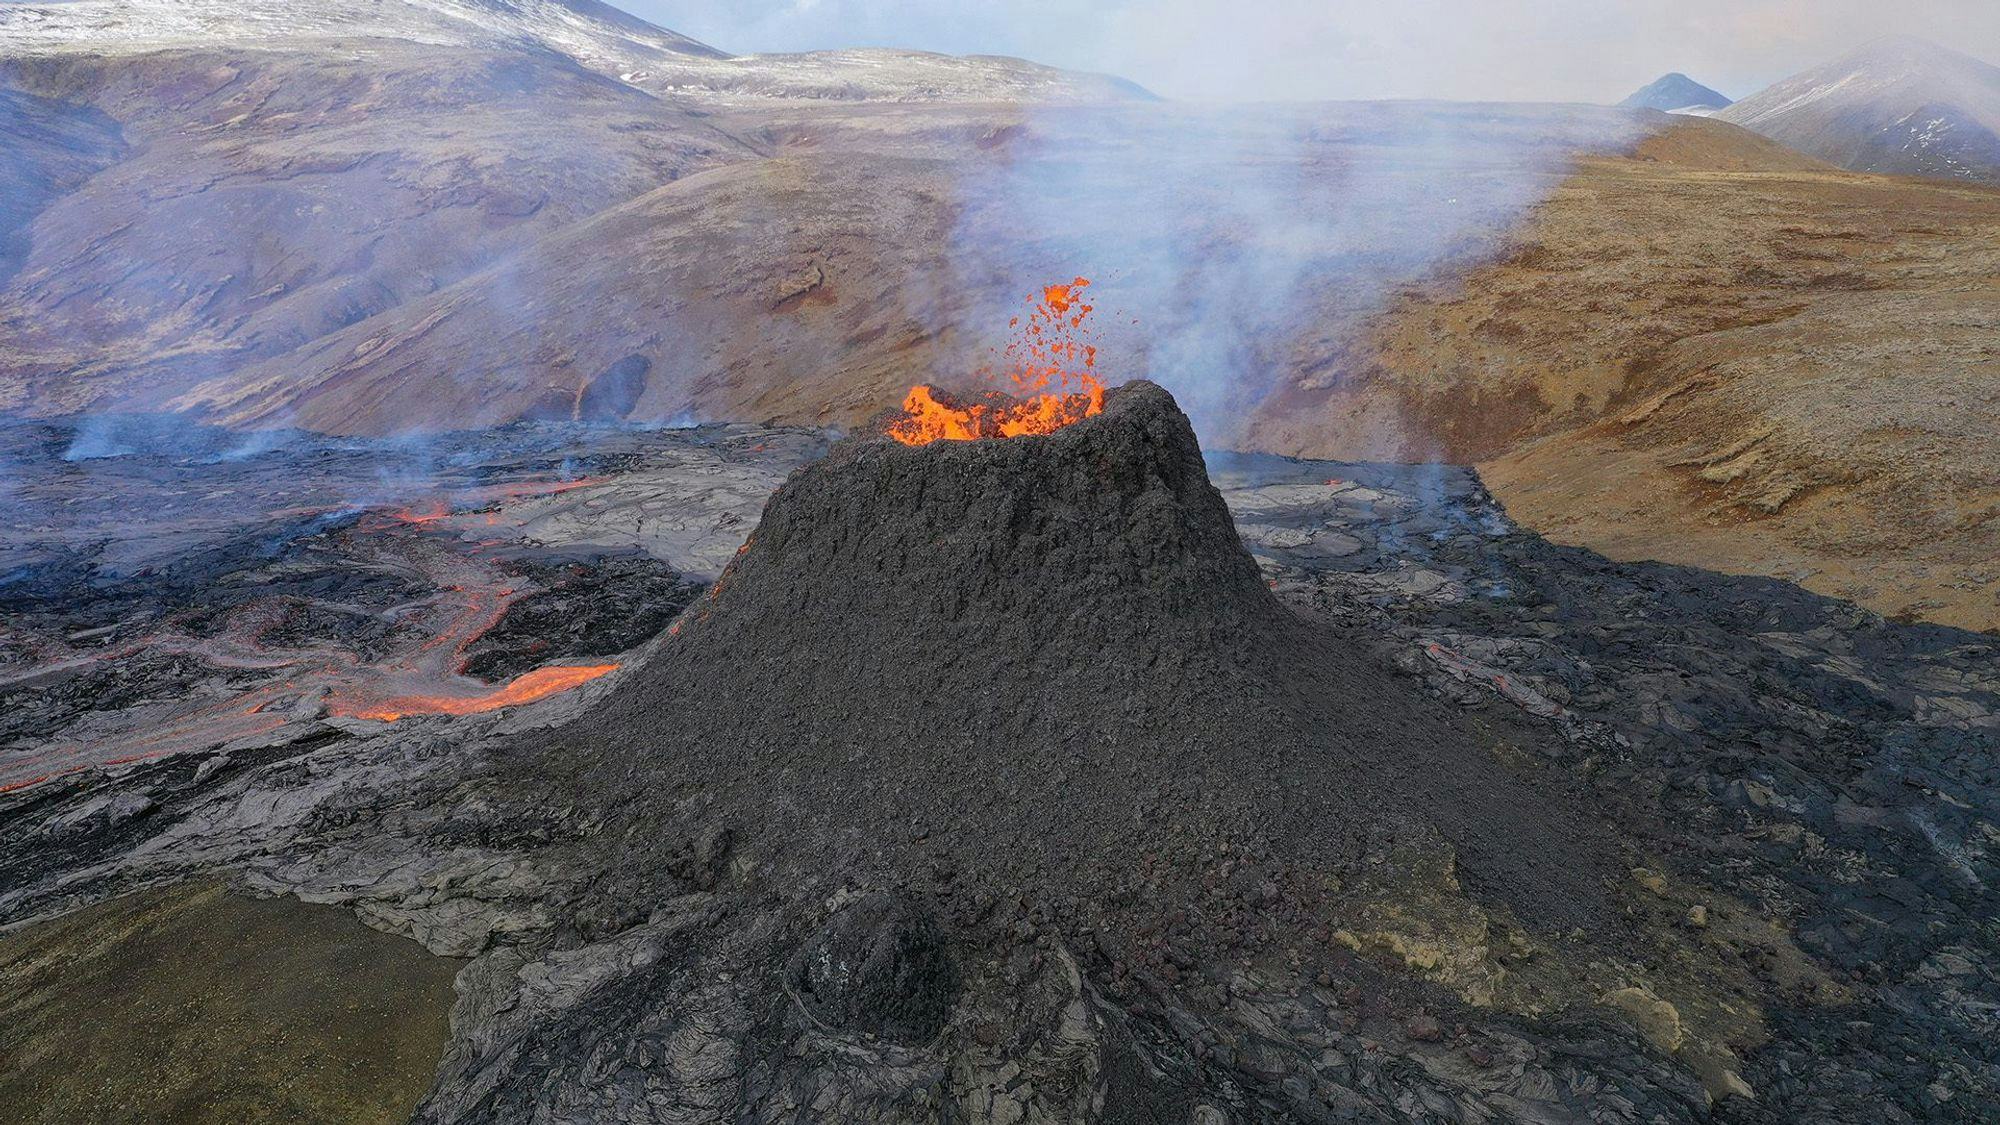 An active volcano eruption with lava flowing down the terrain, emitting smoke